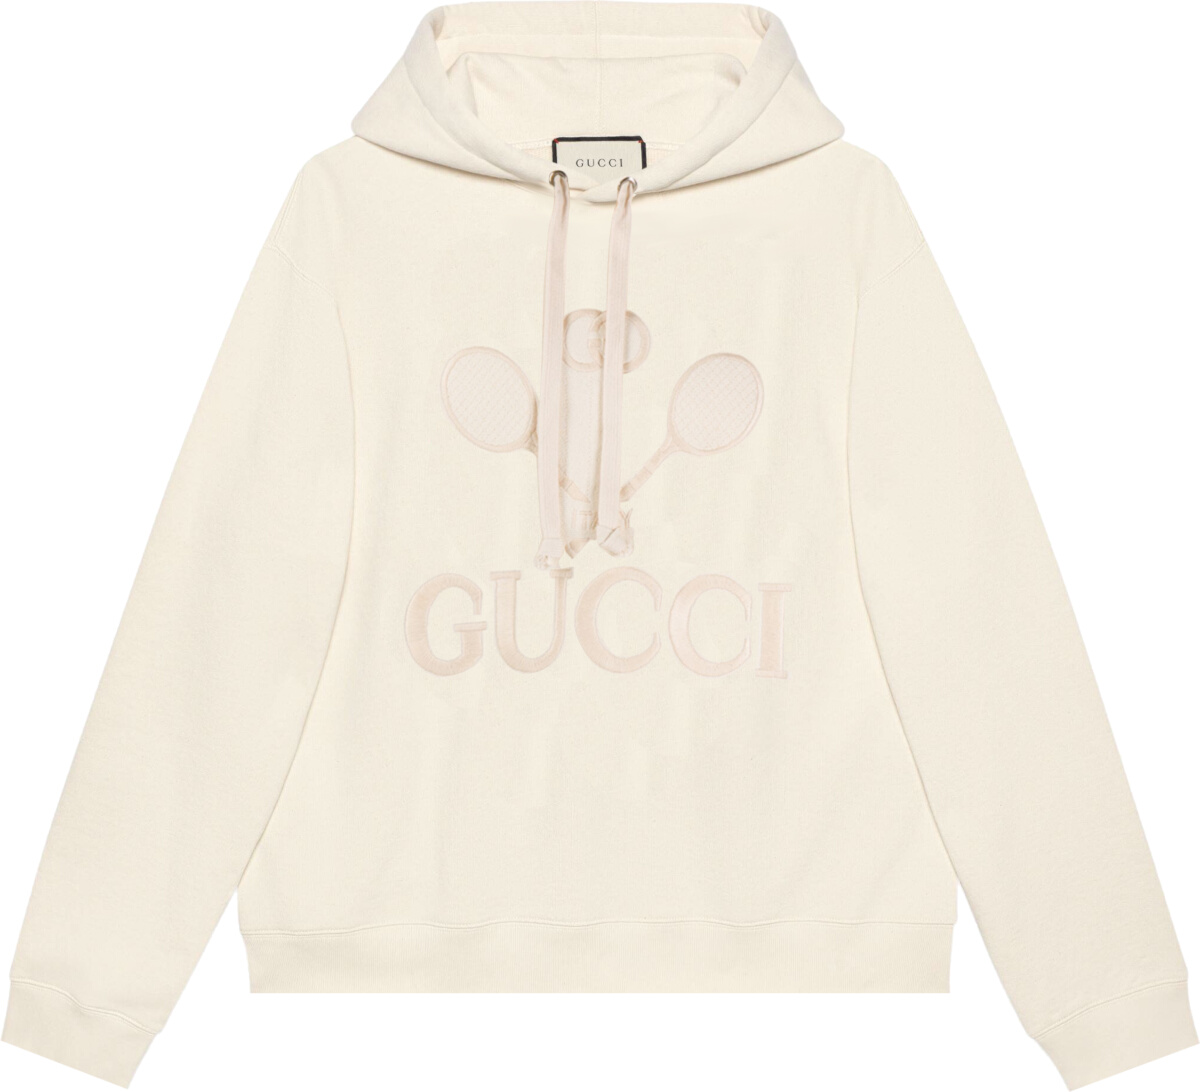 Gucci White 'Tennis' Hoodie | Incorporated Style